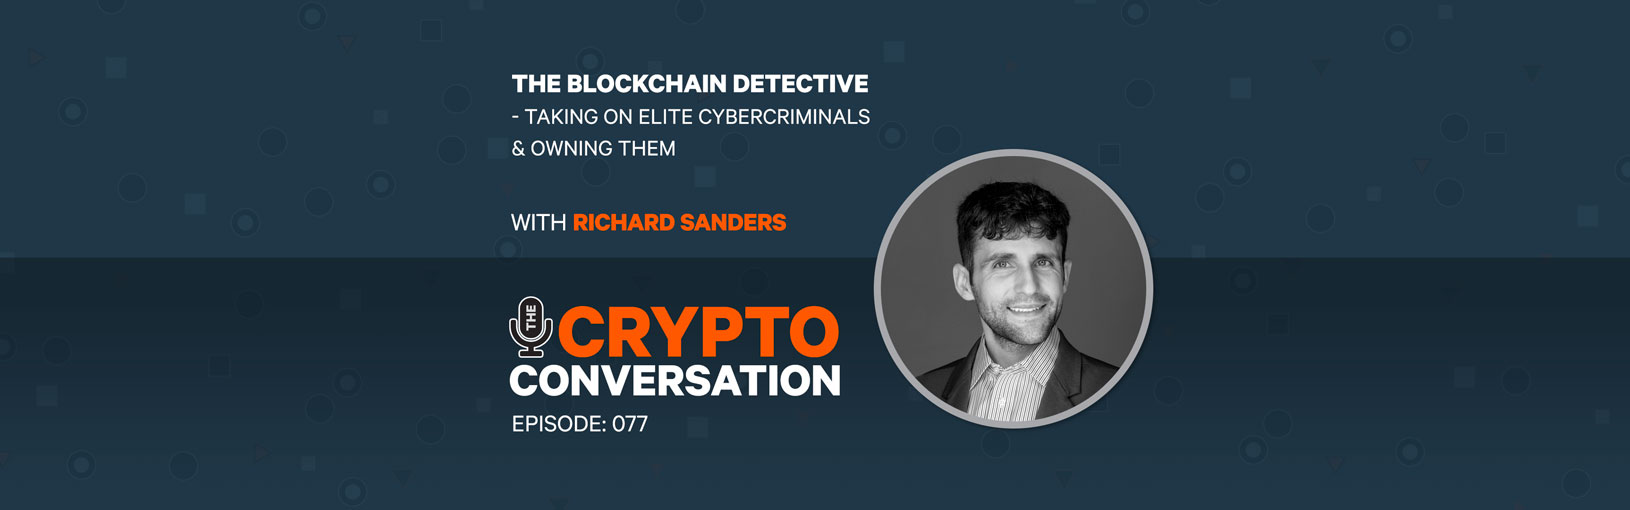 The Blockchain Detective – Taking on elite cybercriminals & owning them